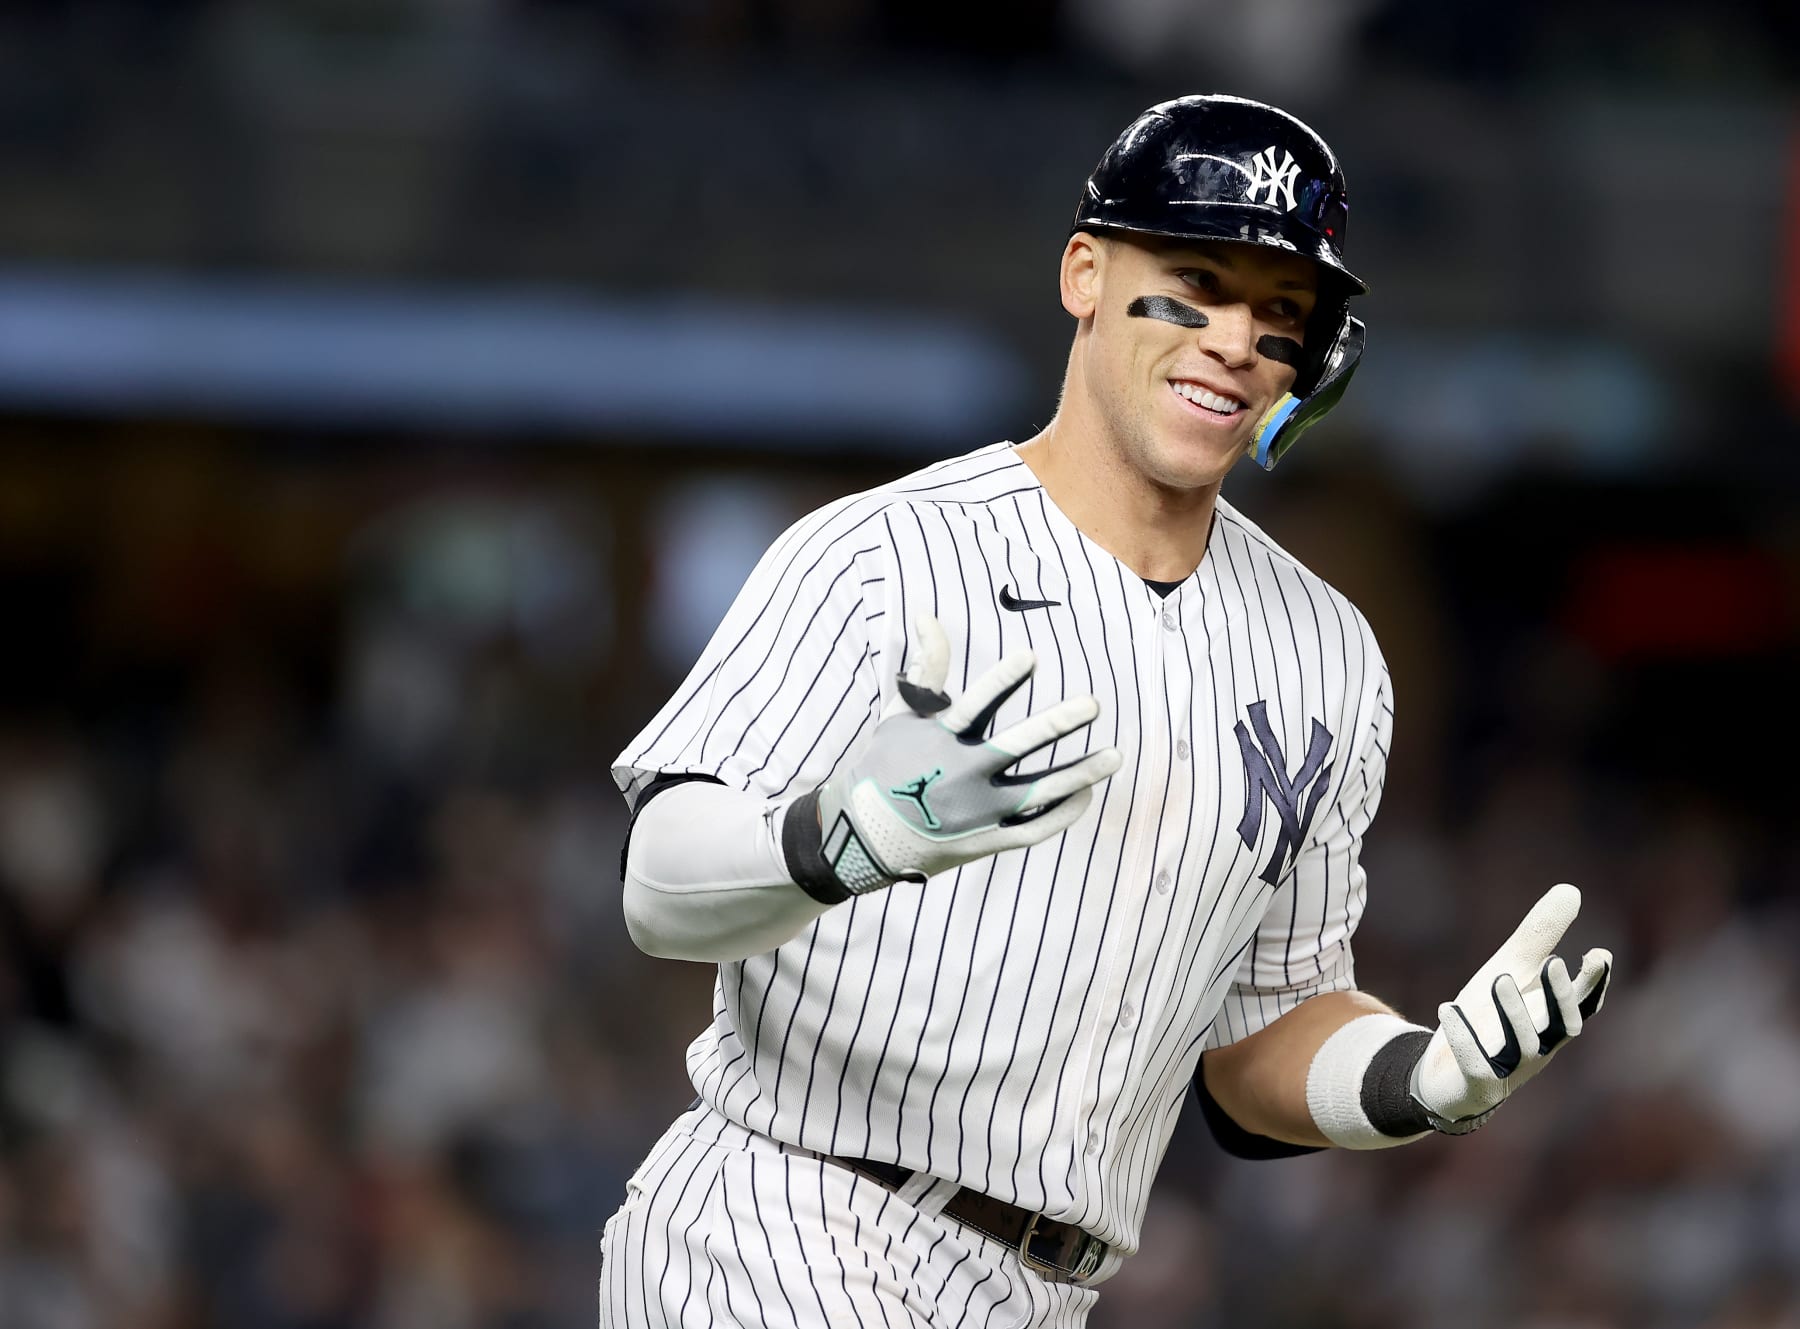 Aaron Judge and Pete Alonso rookie season quiz